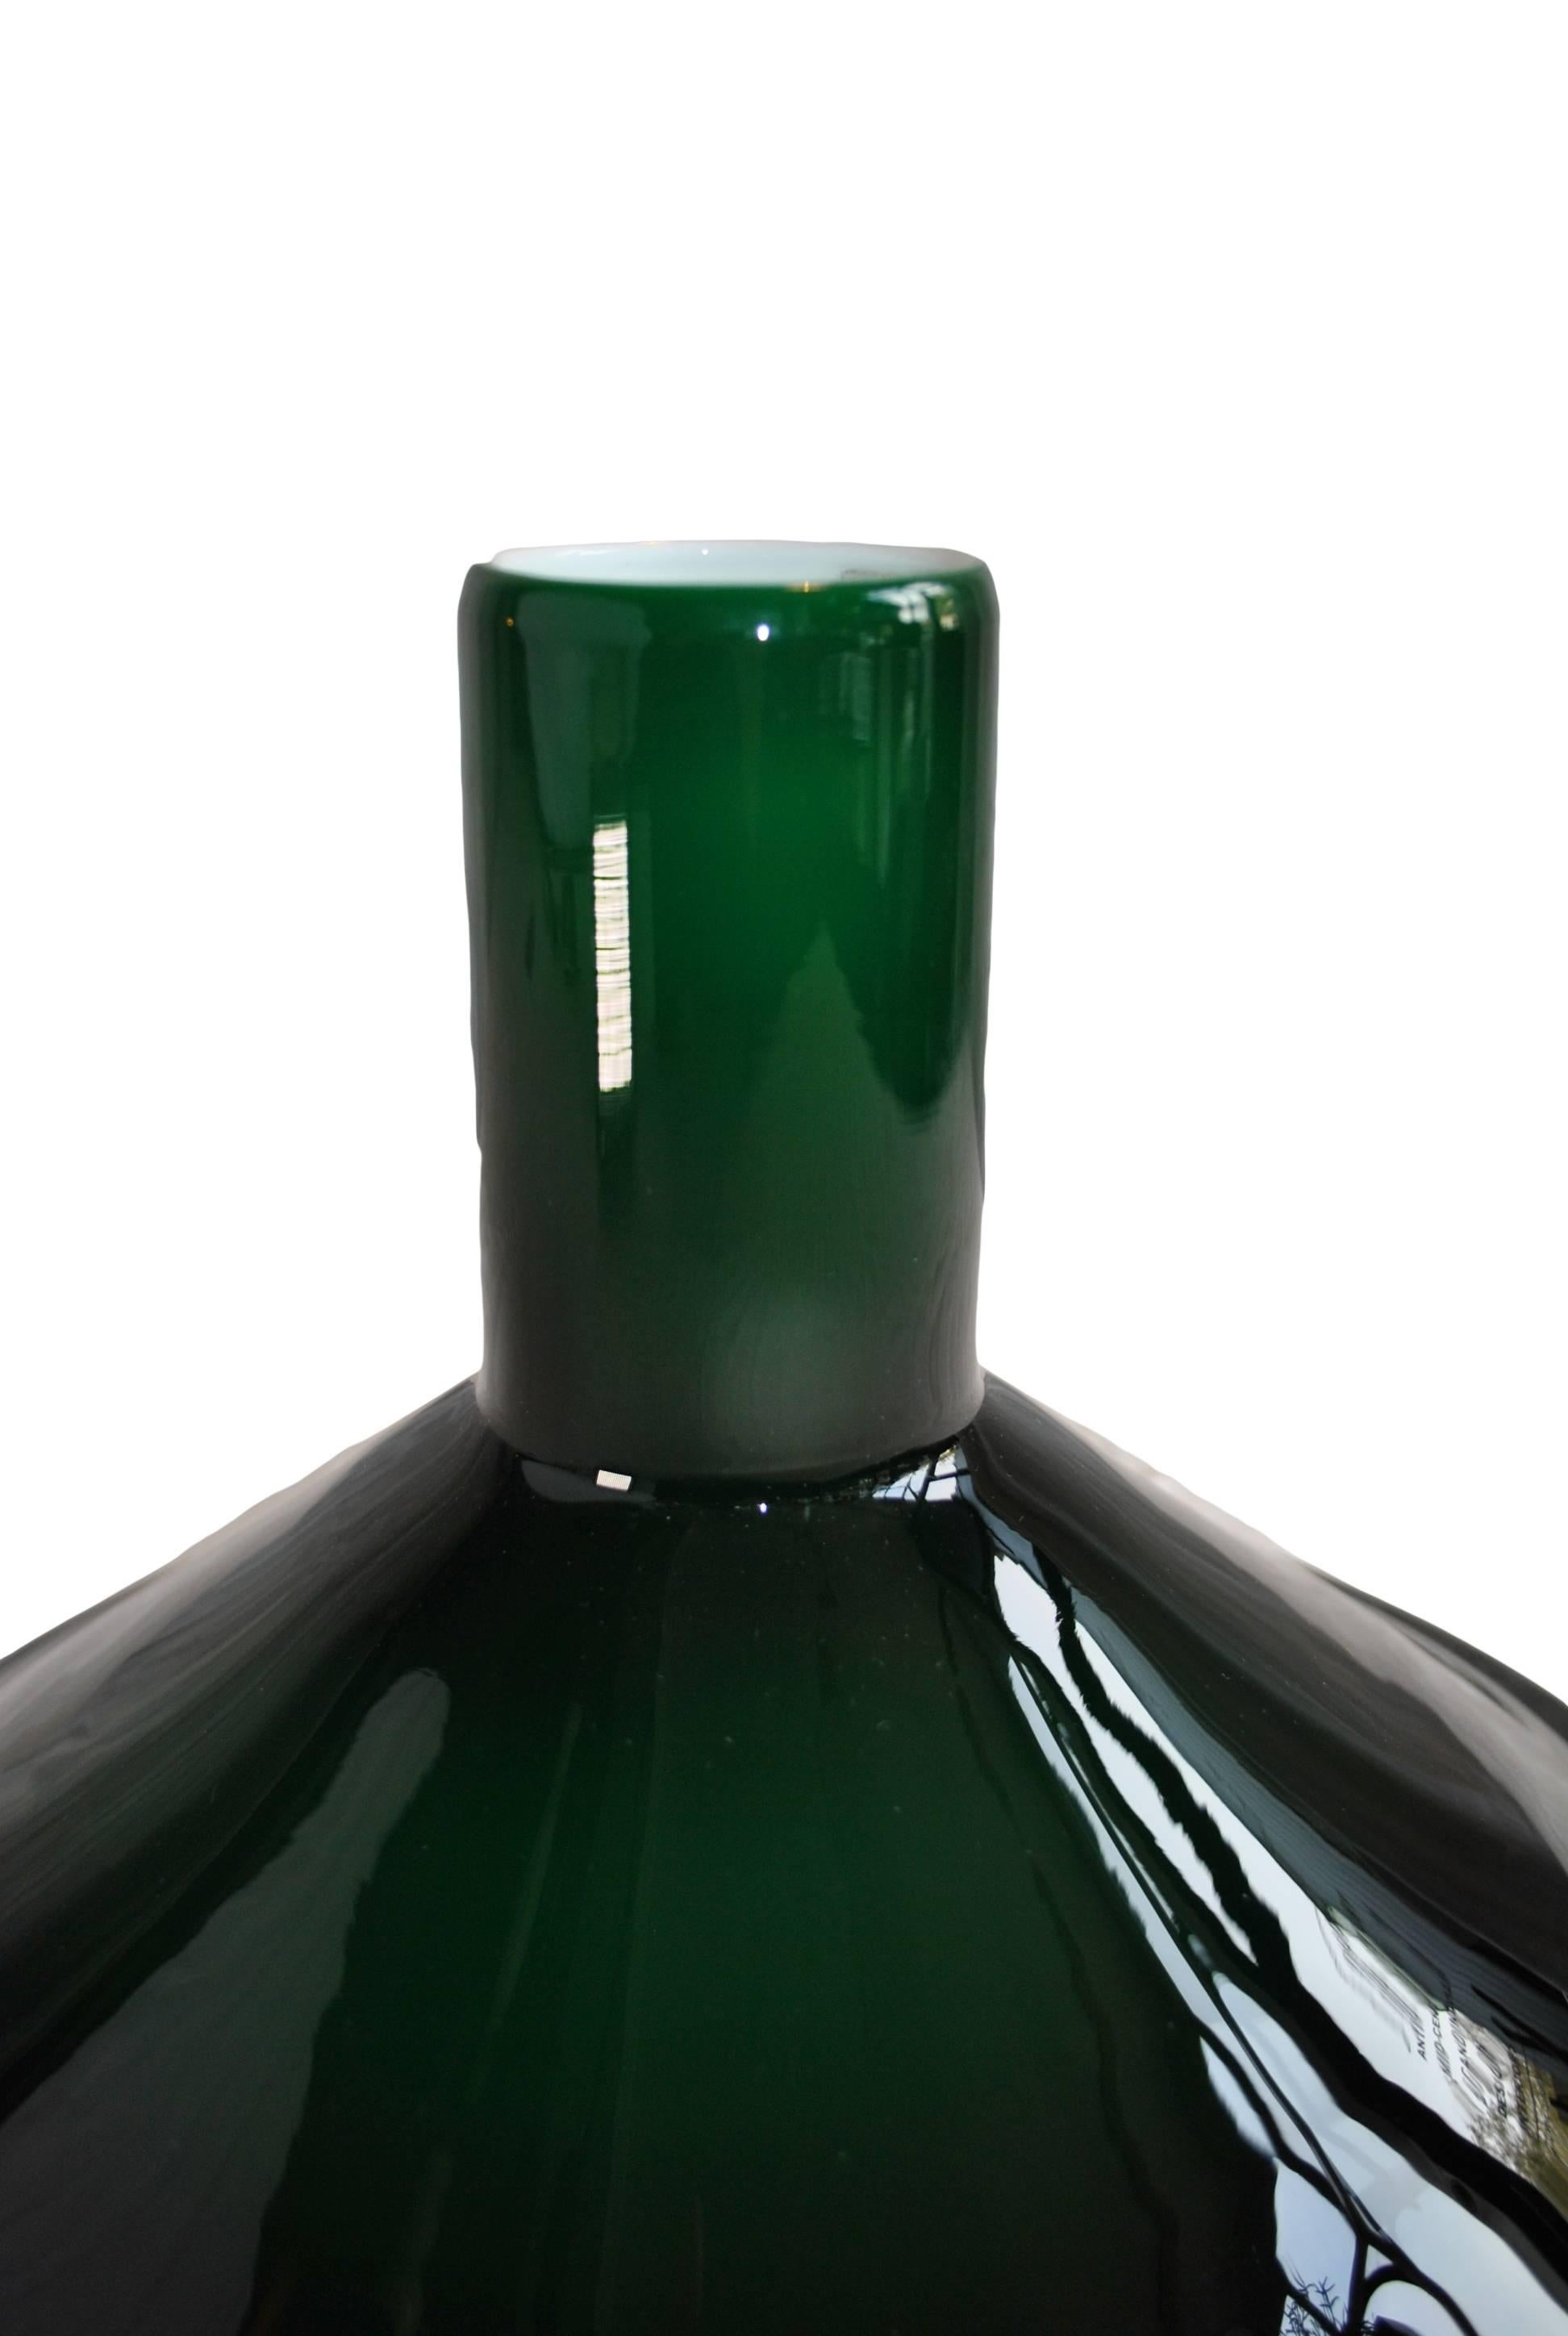 A pair of P&T pendant lights designed by Michael Bang for Holmegaard, 1972.
Green Holmegaard glass with white inner casing.
We currently have a total of four in stock.